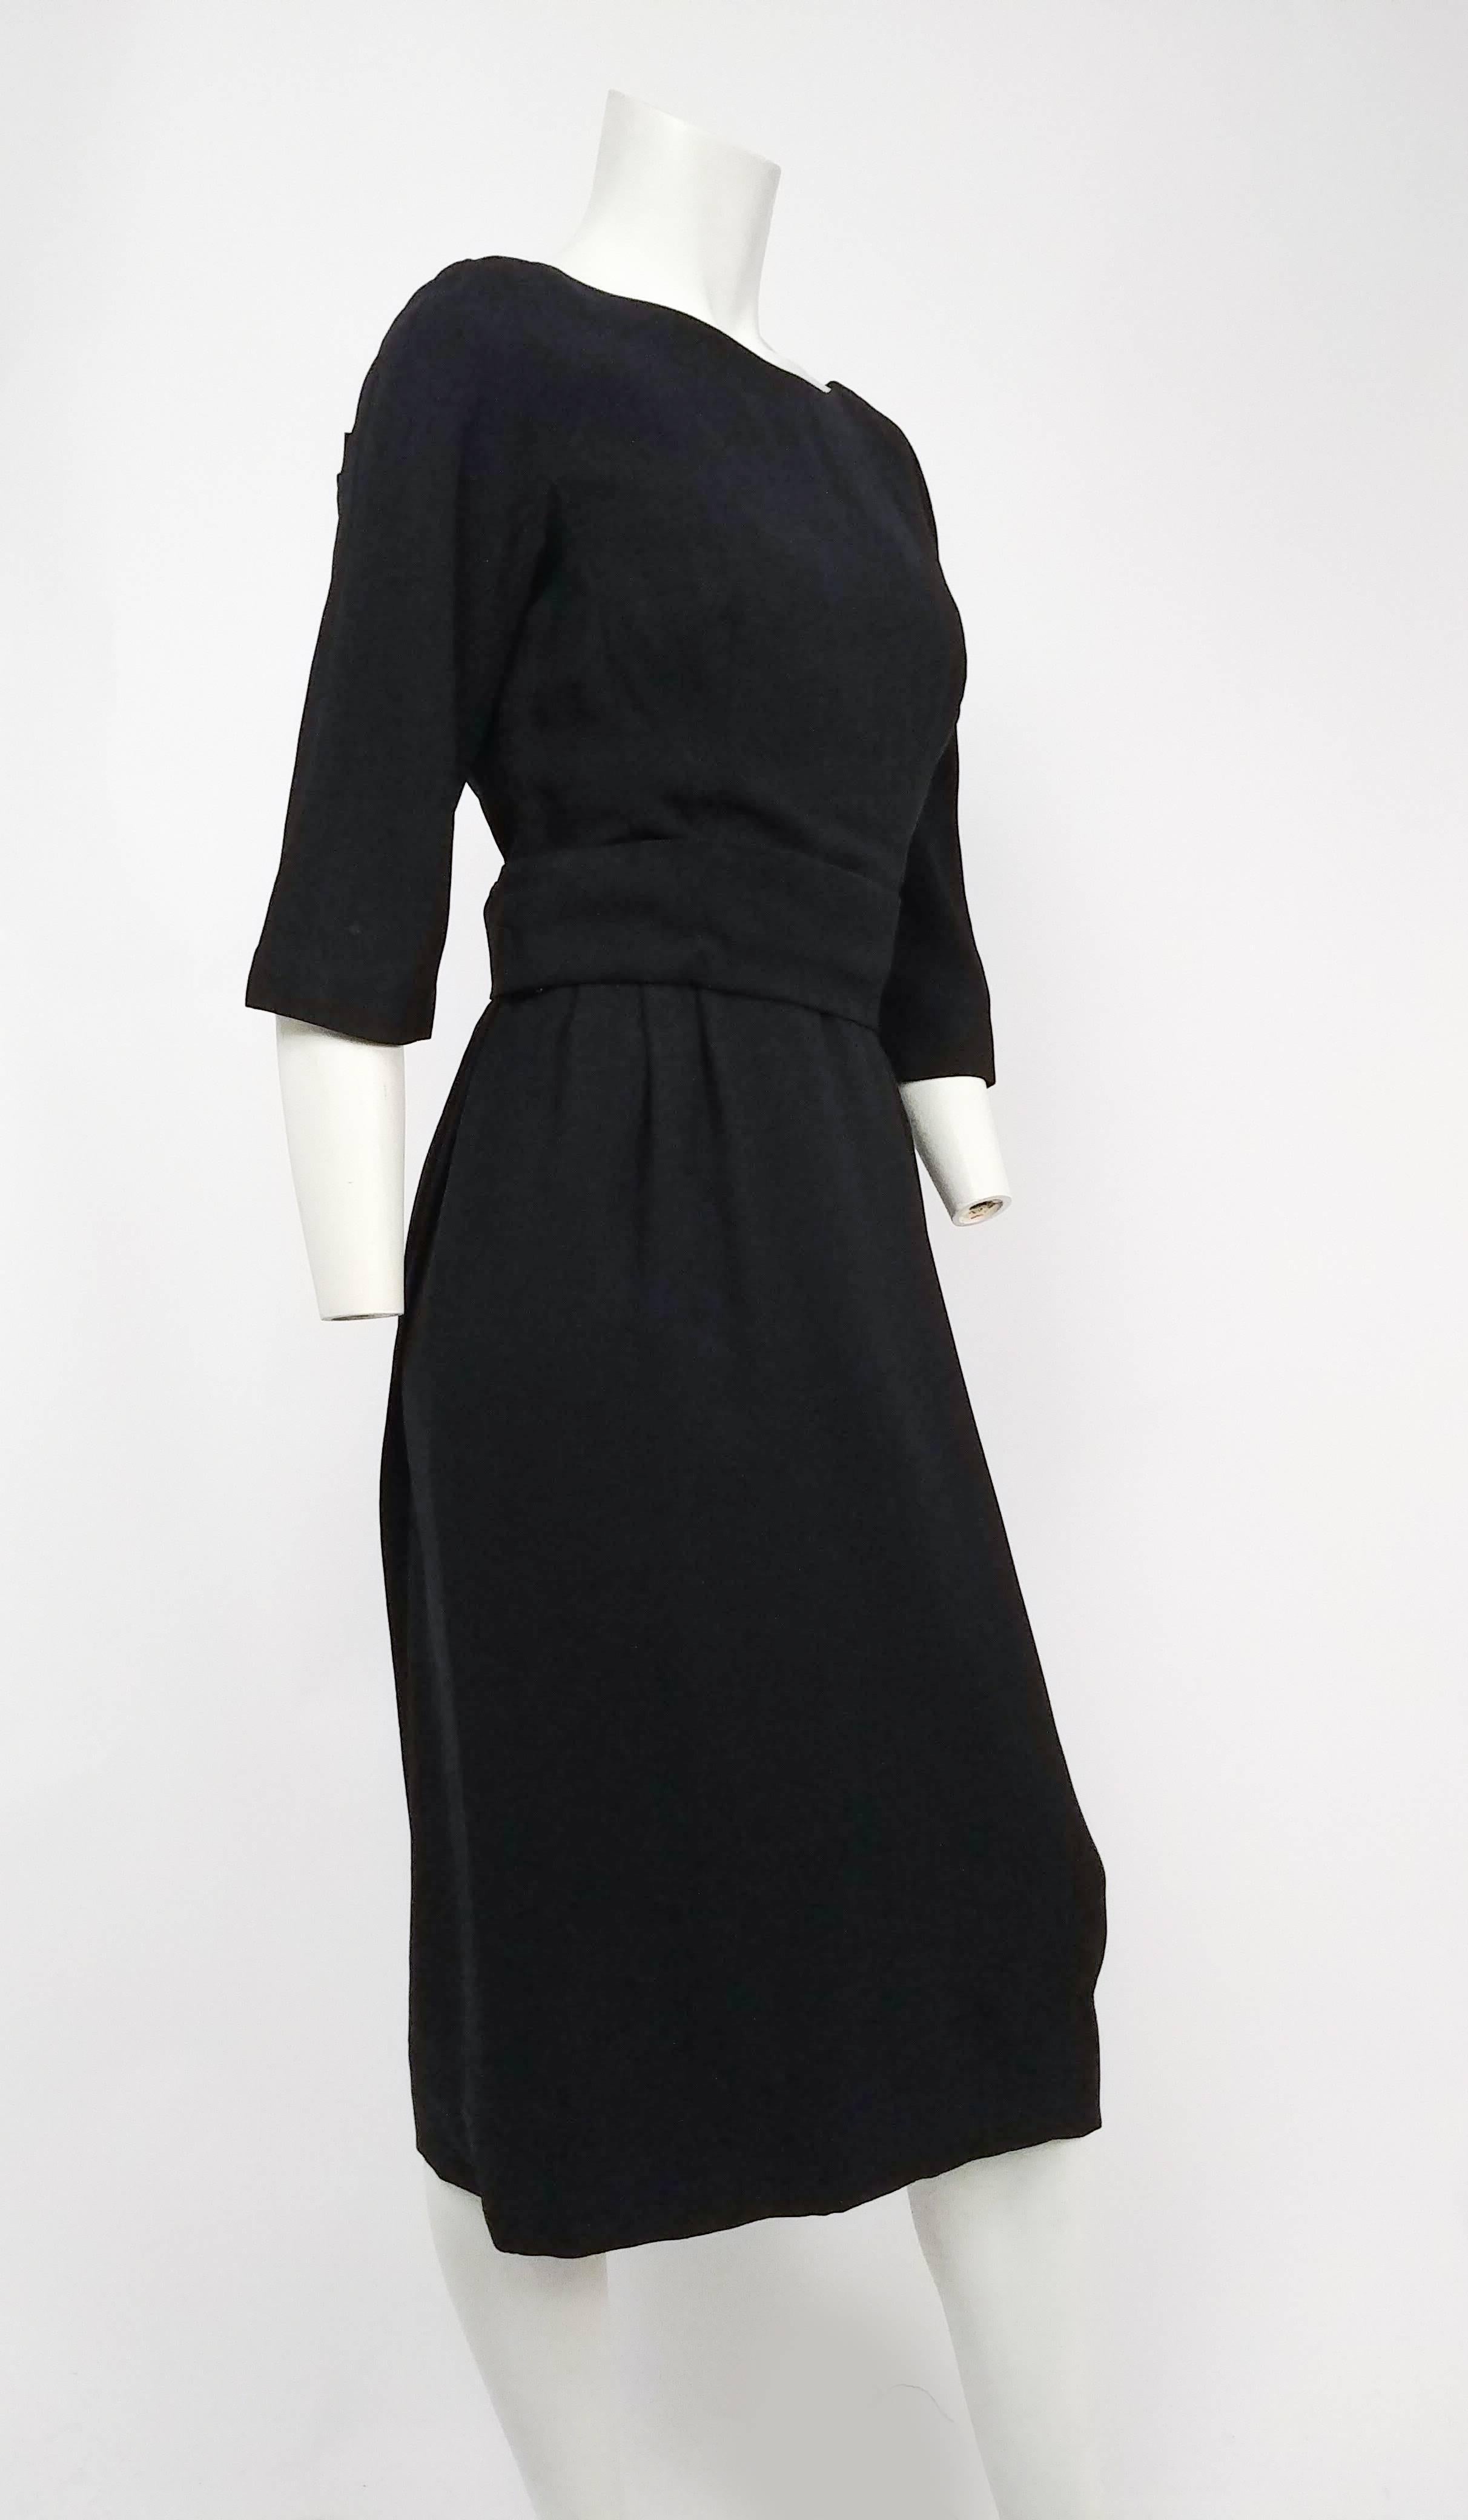 1950s Adele Simpson Black Draped Back Cocktail Dress. Amazingly constructed cocktail dress with demure front and low-back draped back. Glove-length sleeves, lined in organza. 